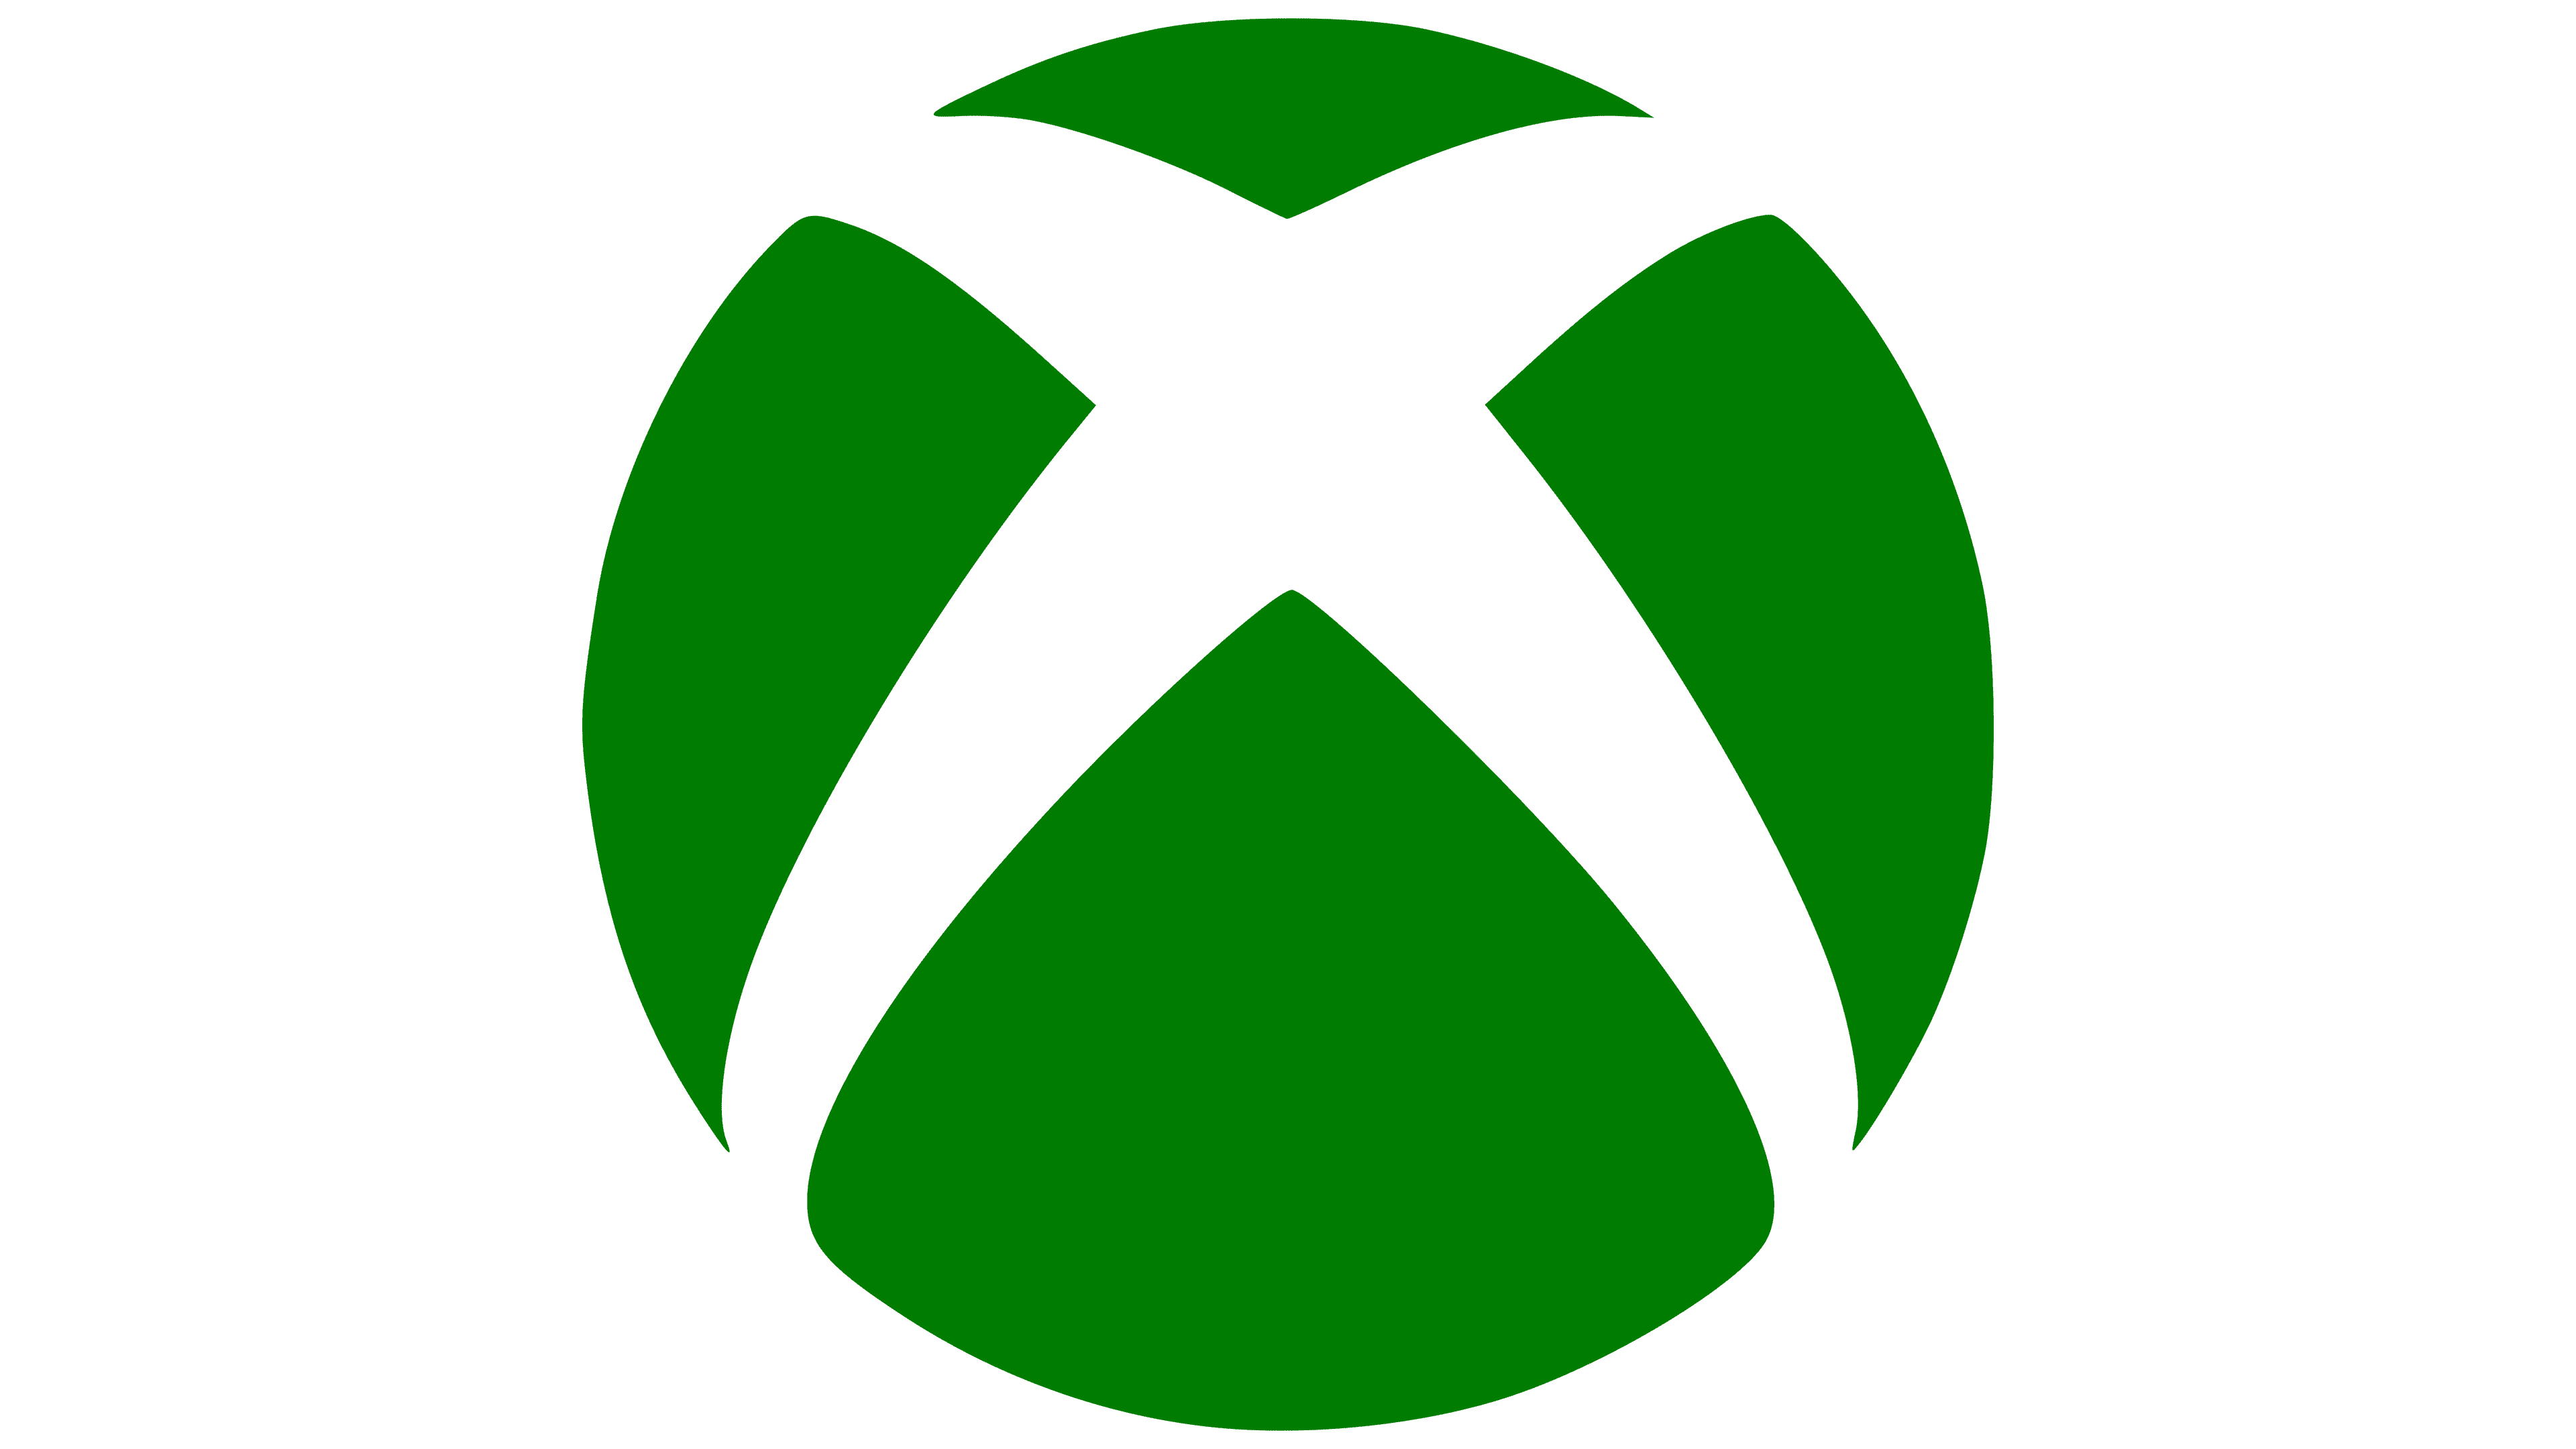 Xbox Hd Png Transparent Xbox Hdpng Images Pluspng Images